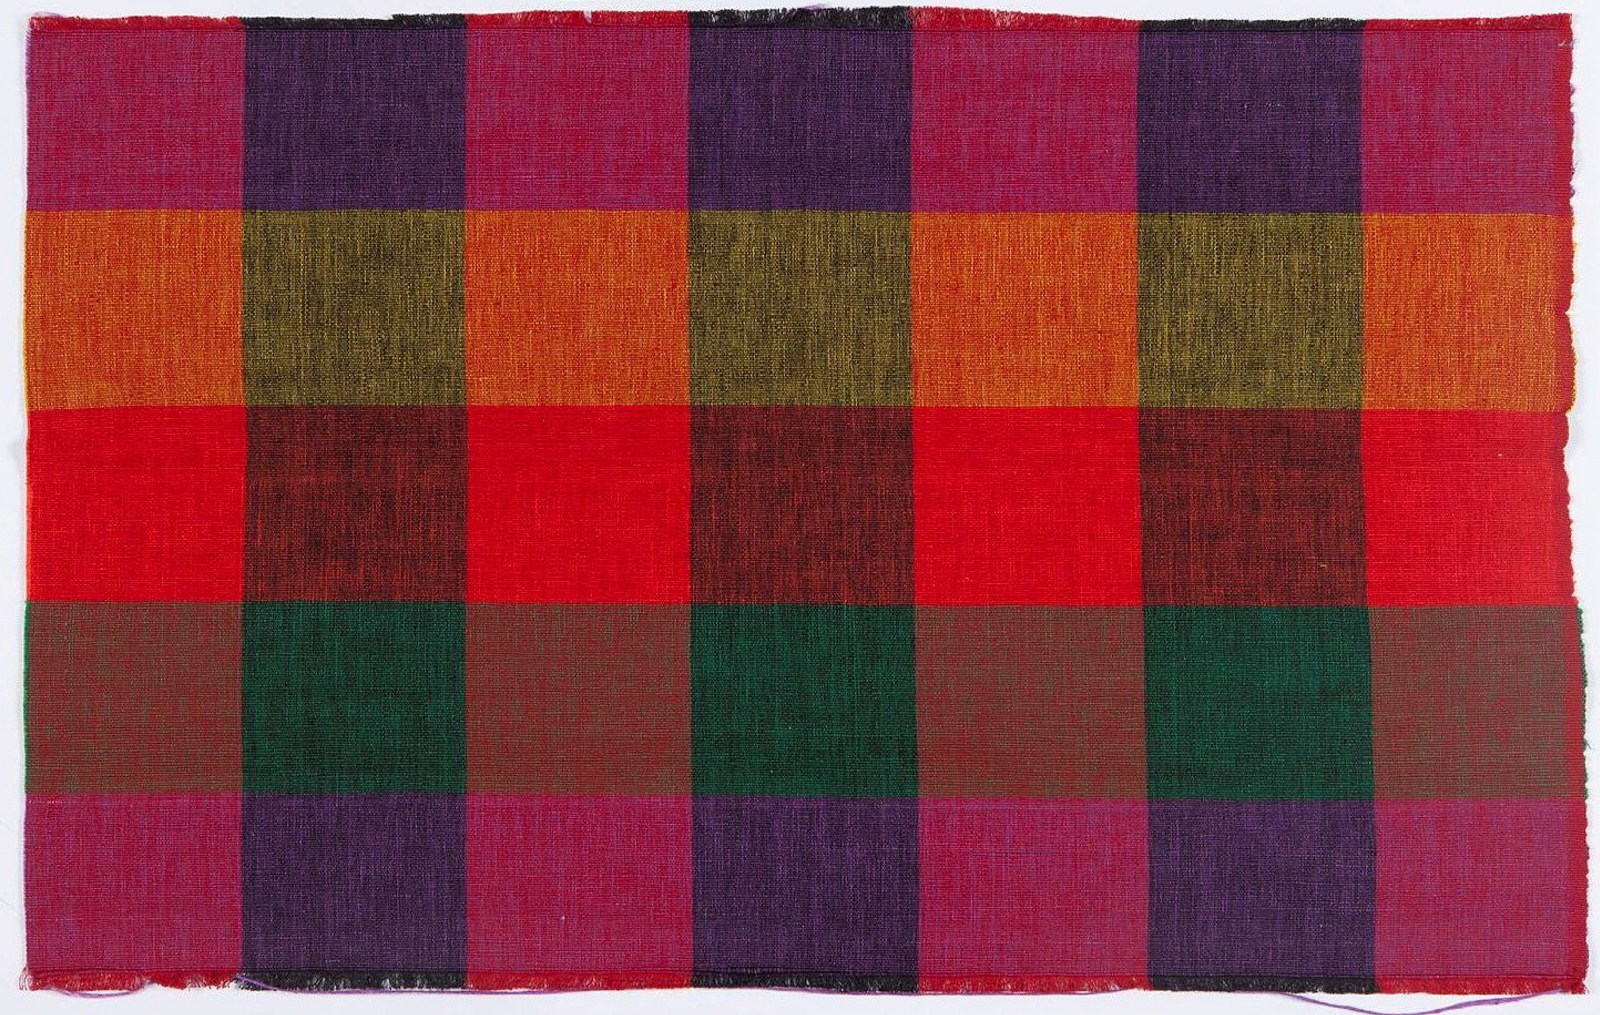 Length of cotton textile, Webbing and Belting Factory Ltd, India, 1970s